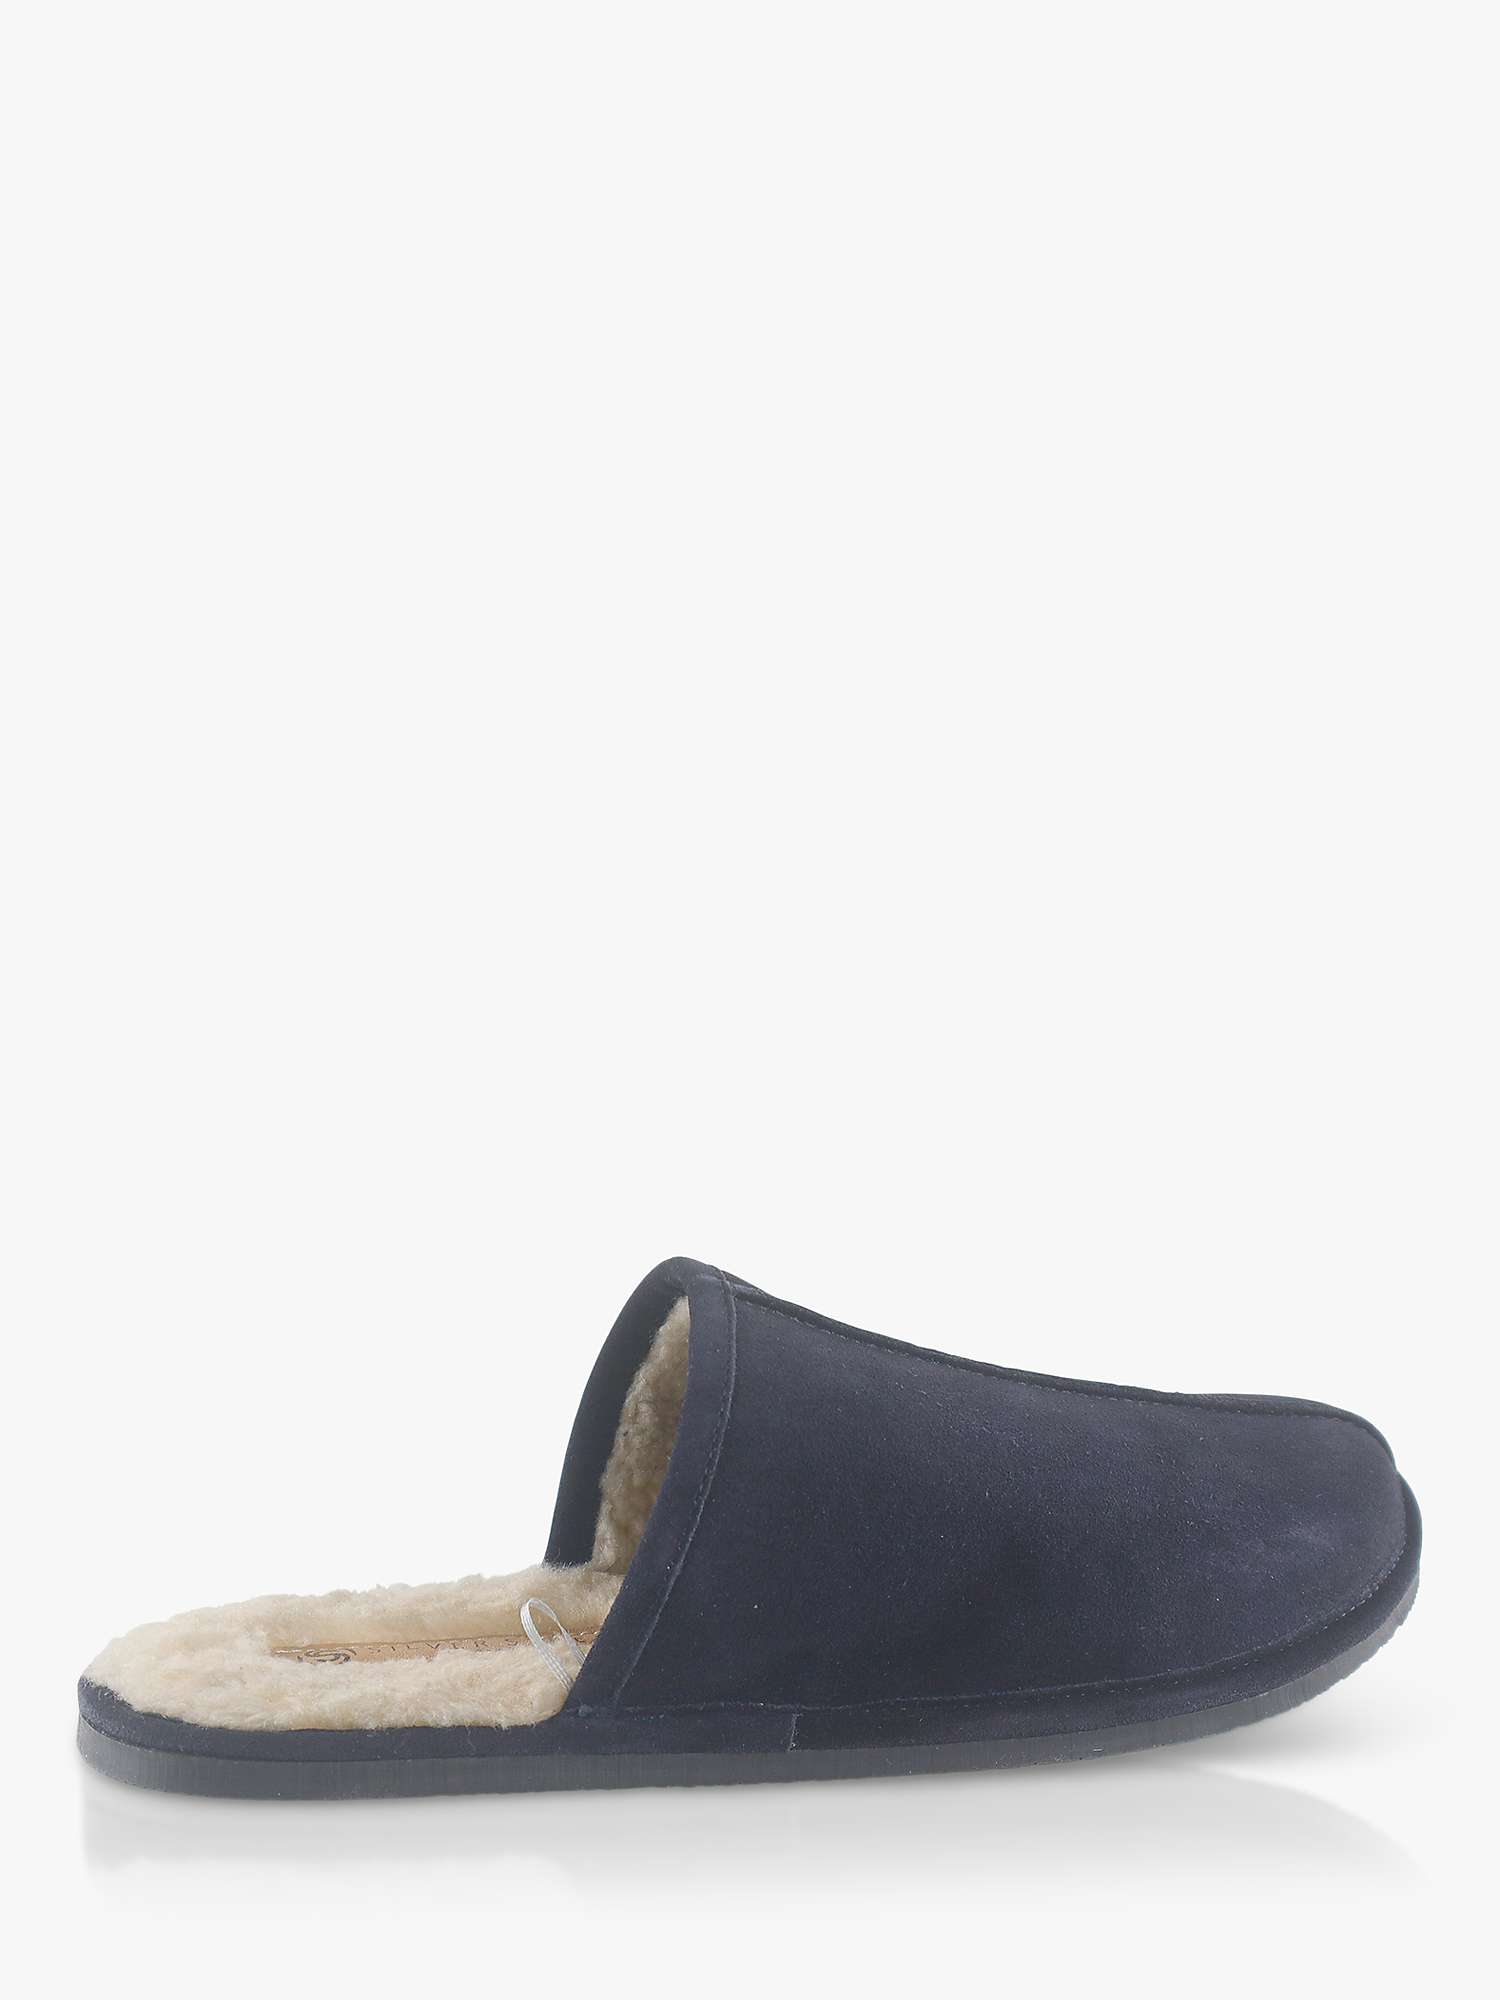 Buy Silver Street London Smithfield Suede Slippers Online at johnlewis.com